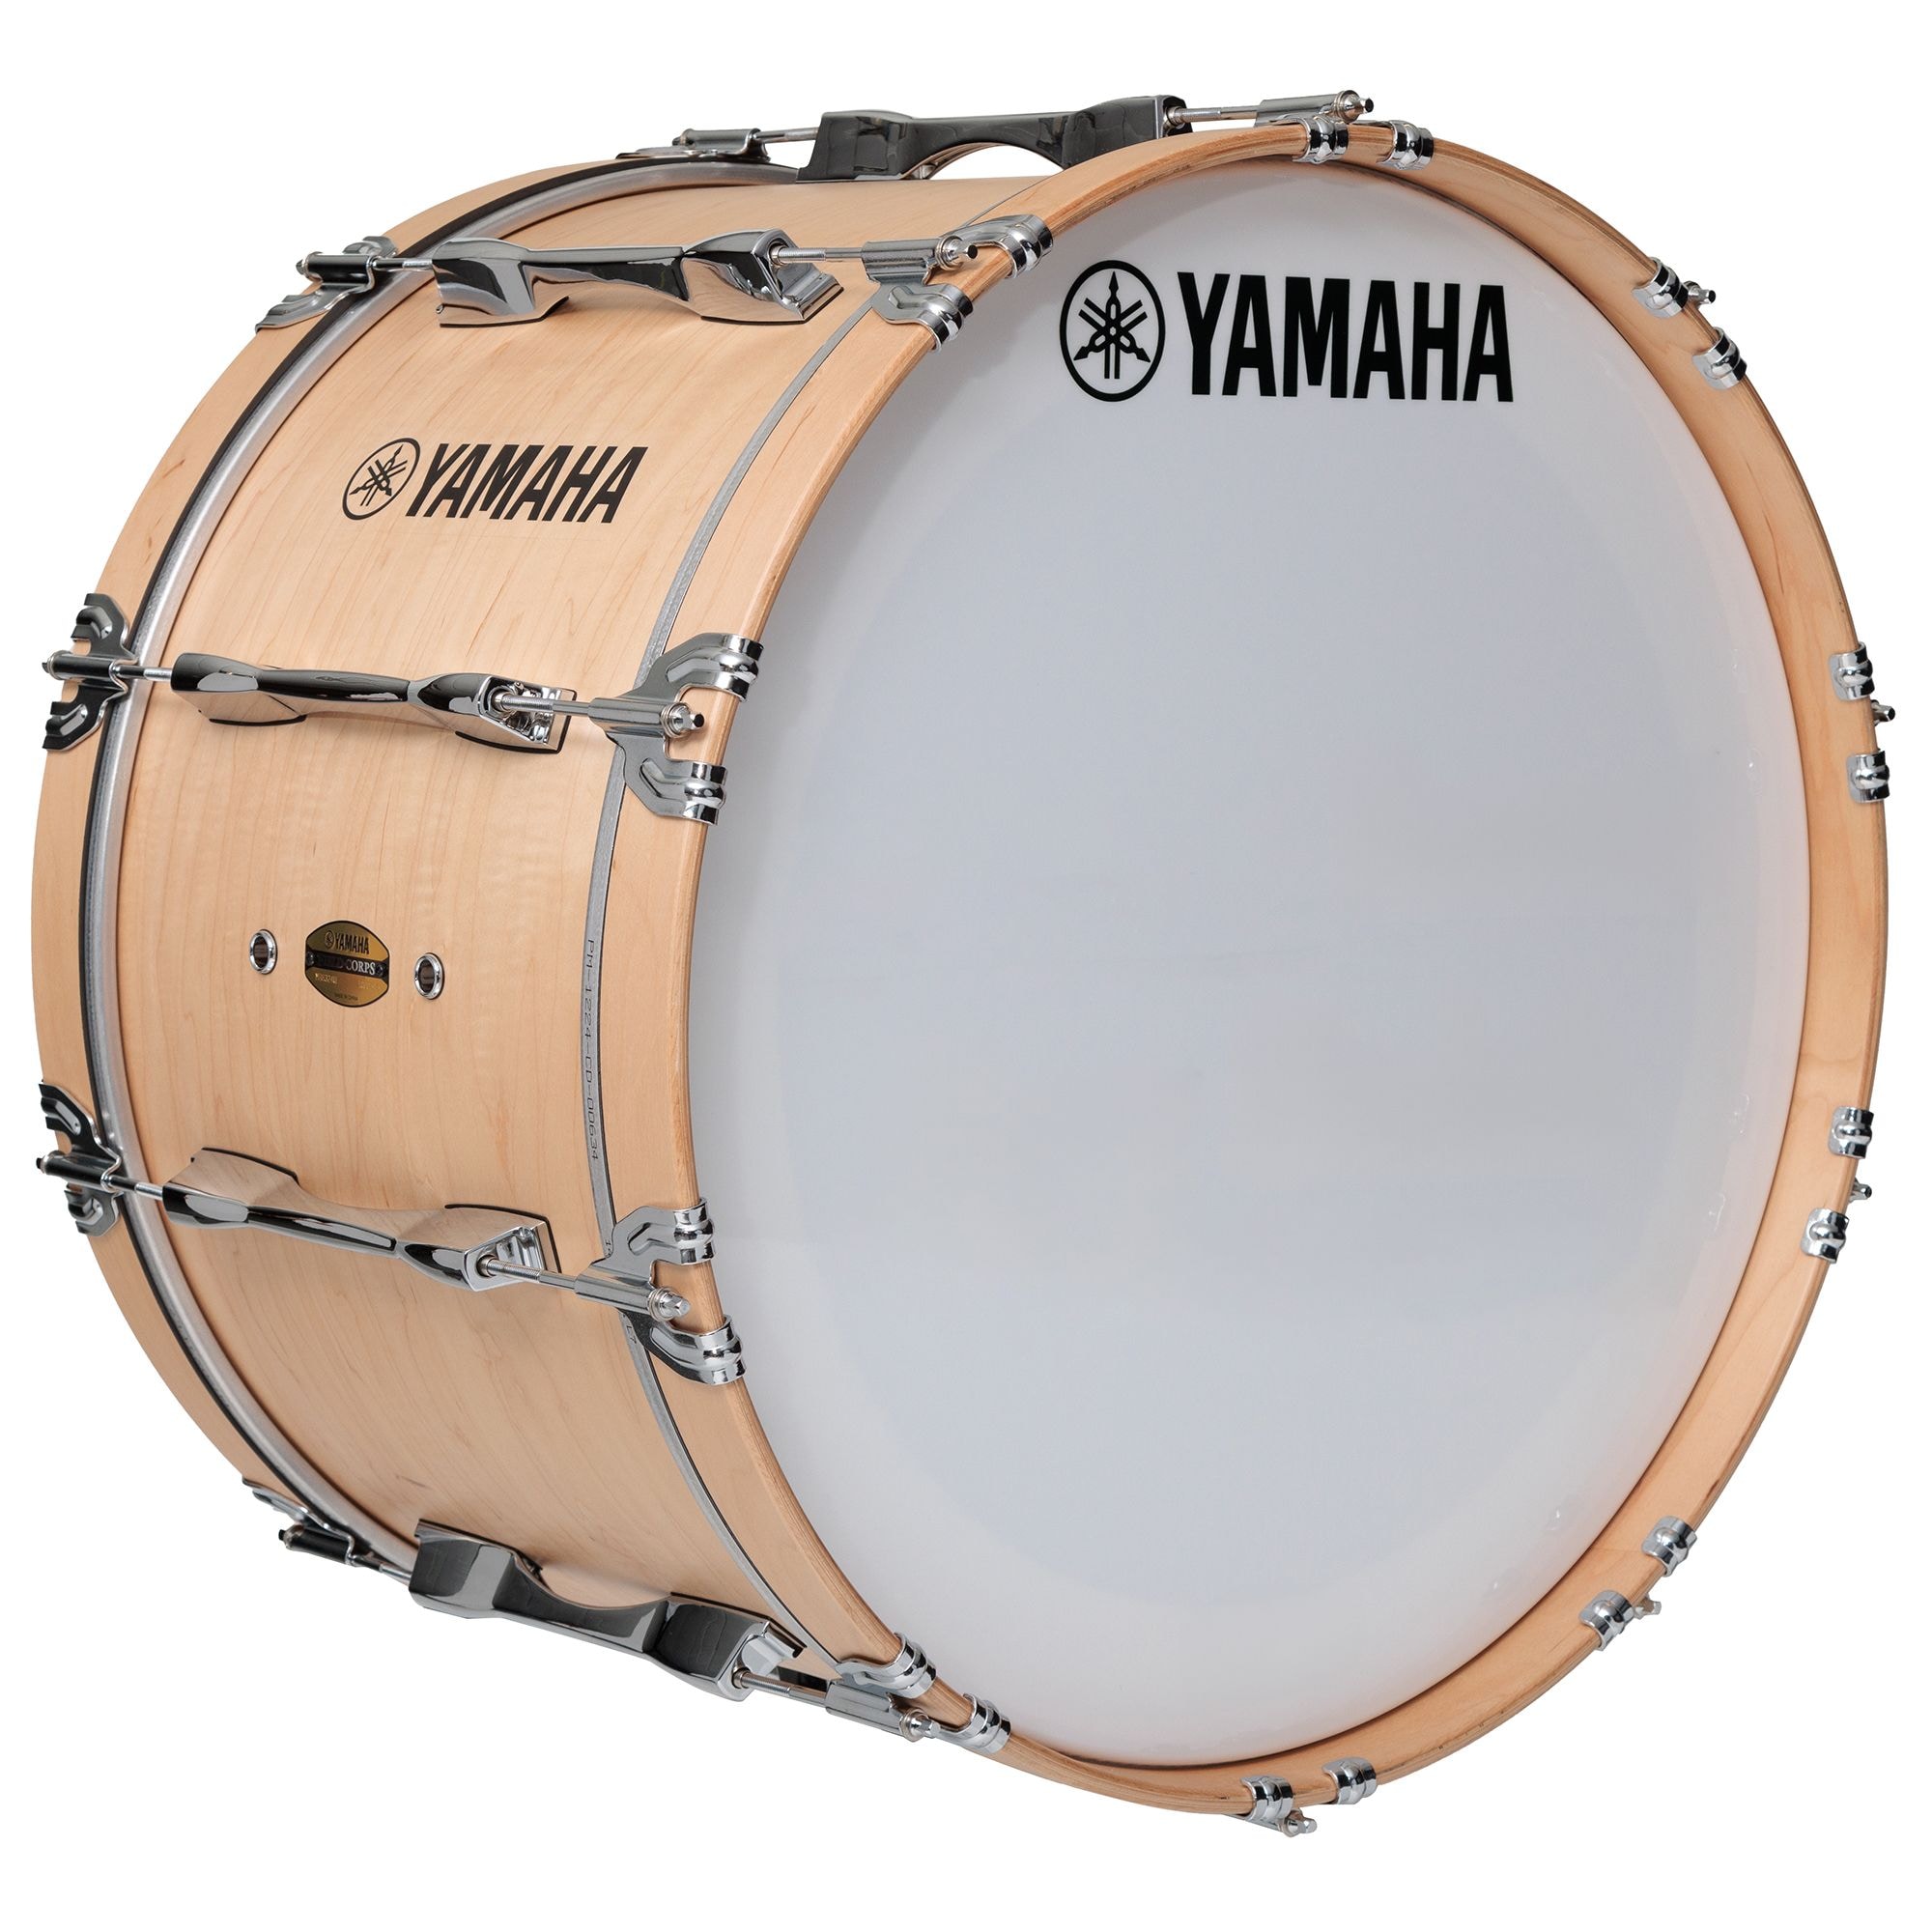 MB-8300 Field-Corps™ Series - Specs - Marching Drums - Marching Instruments  - Musical Instruments - Products - Yamaha USA